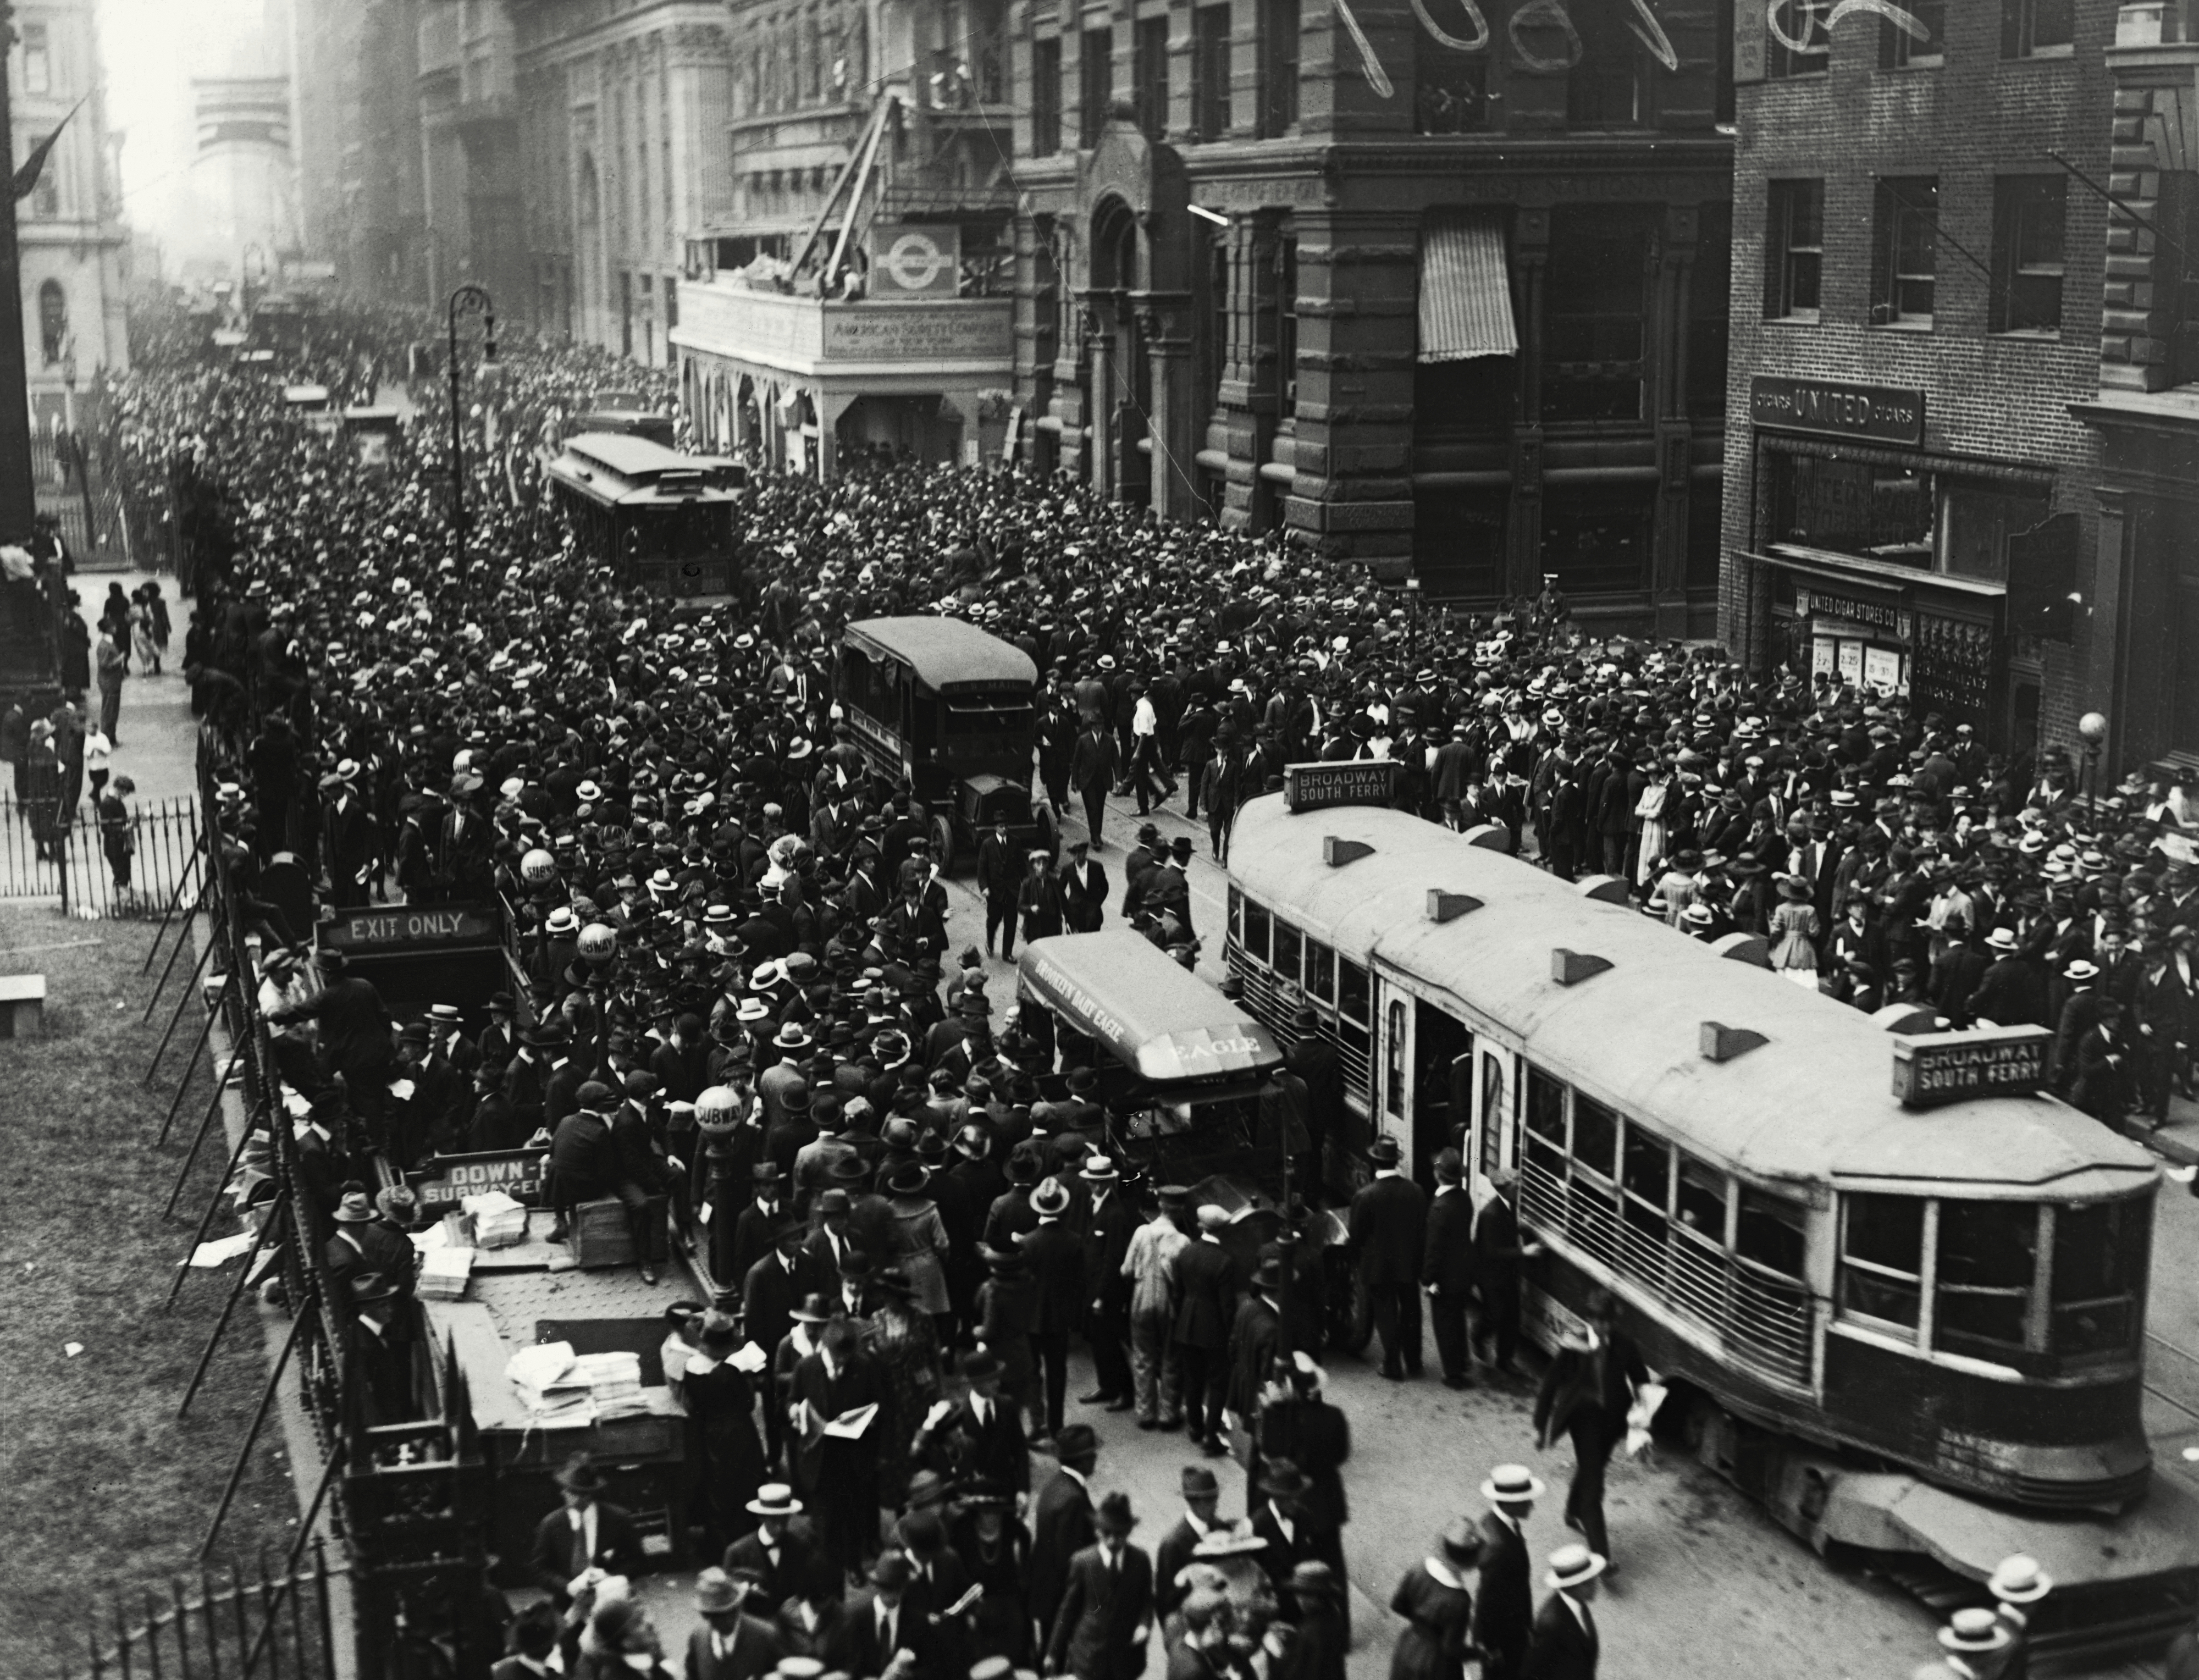 a very packed Wall Street in 1920